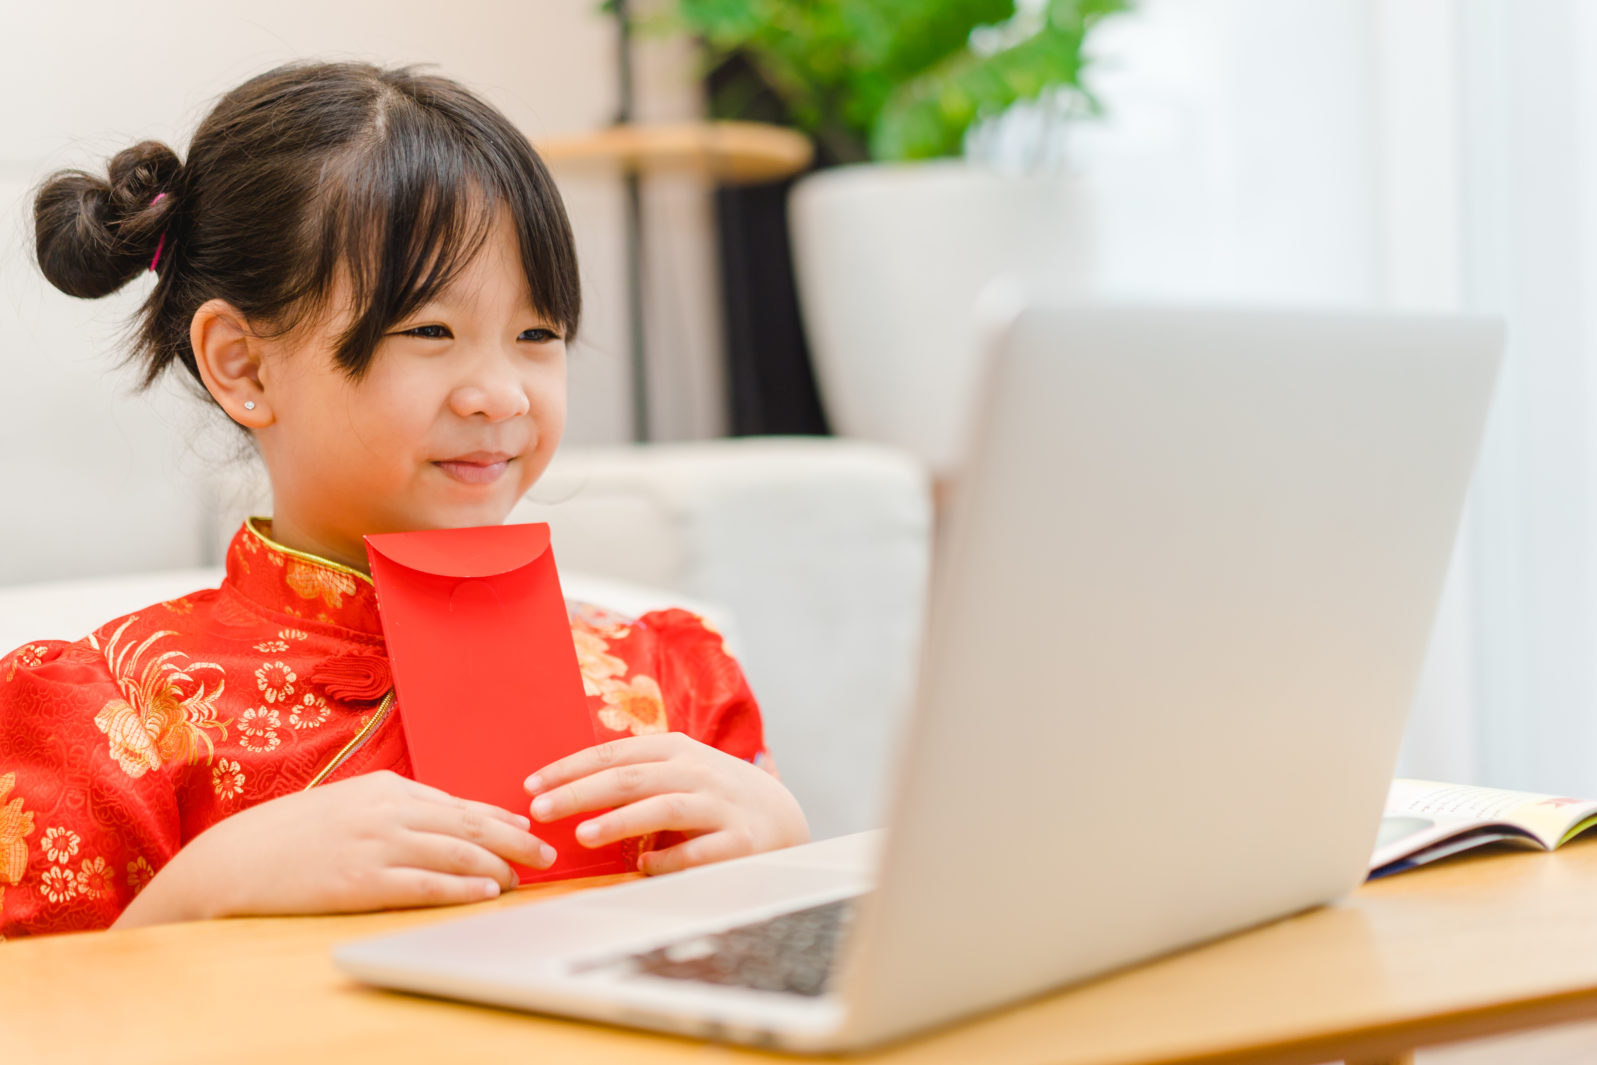 Happy chinese new year.Asian kid girl receive money online wearing chinese traditional qipao dress showing red envelope at home.Online party.Happy chinese new year covid19 lockdown.stay home holiday.